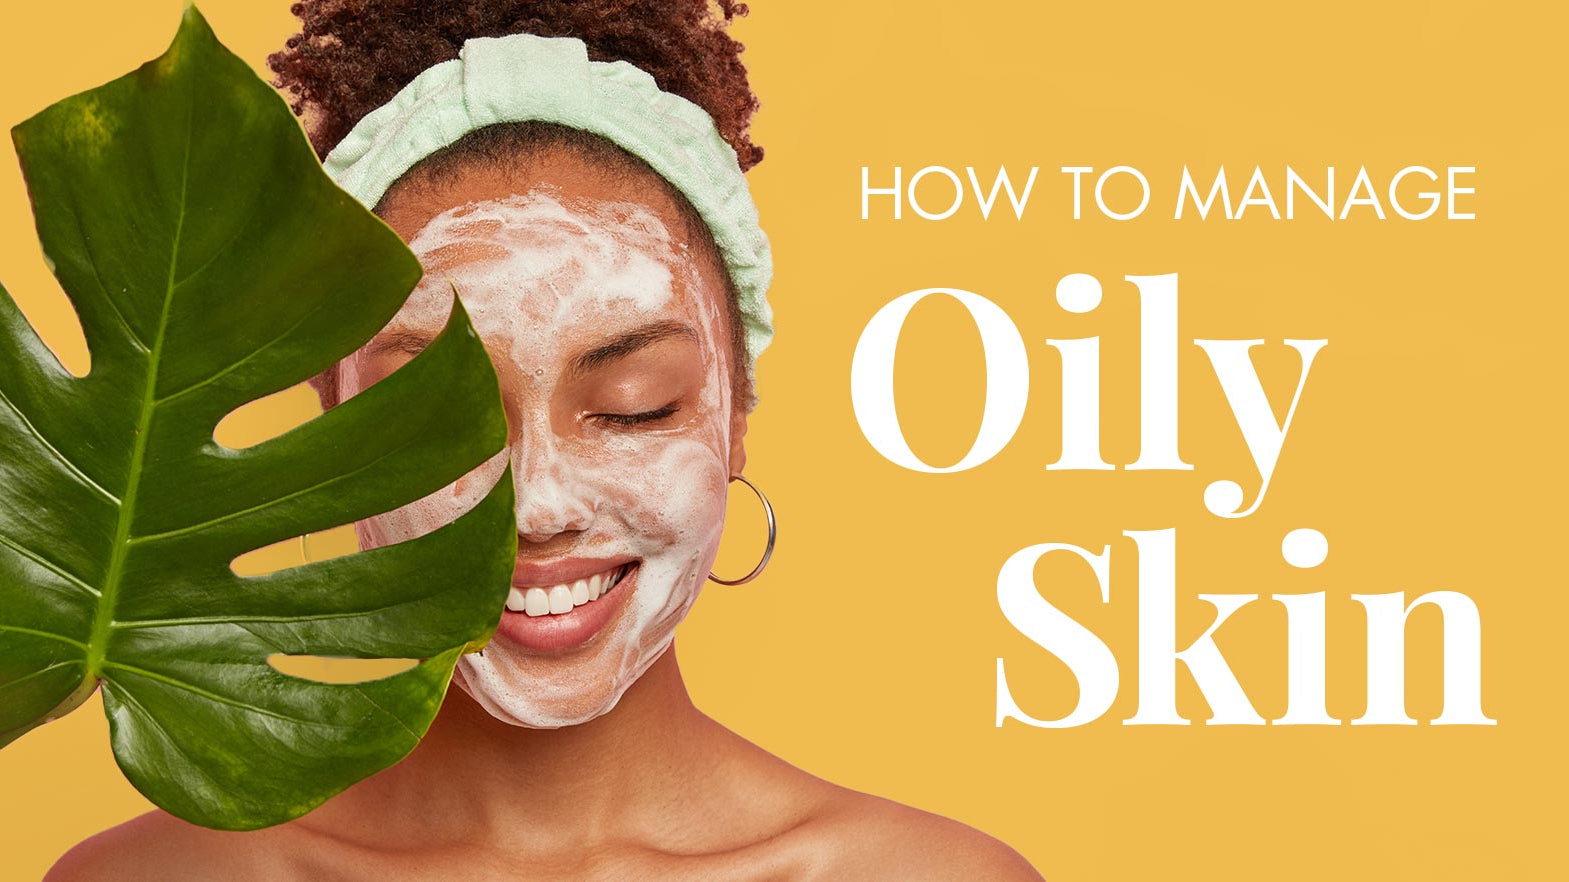 How to Manage Oily Skin in the Summer